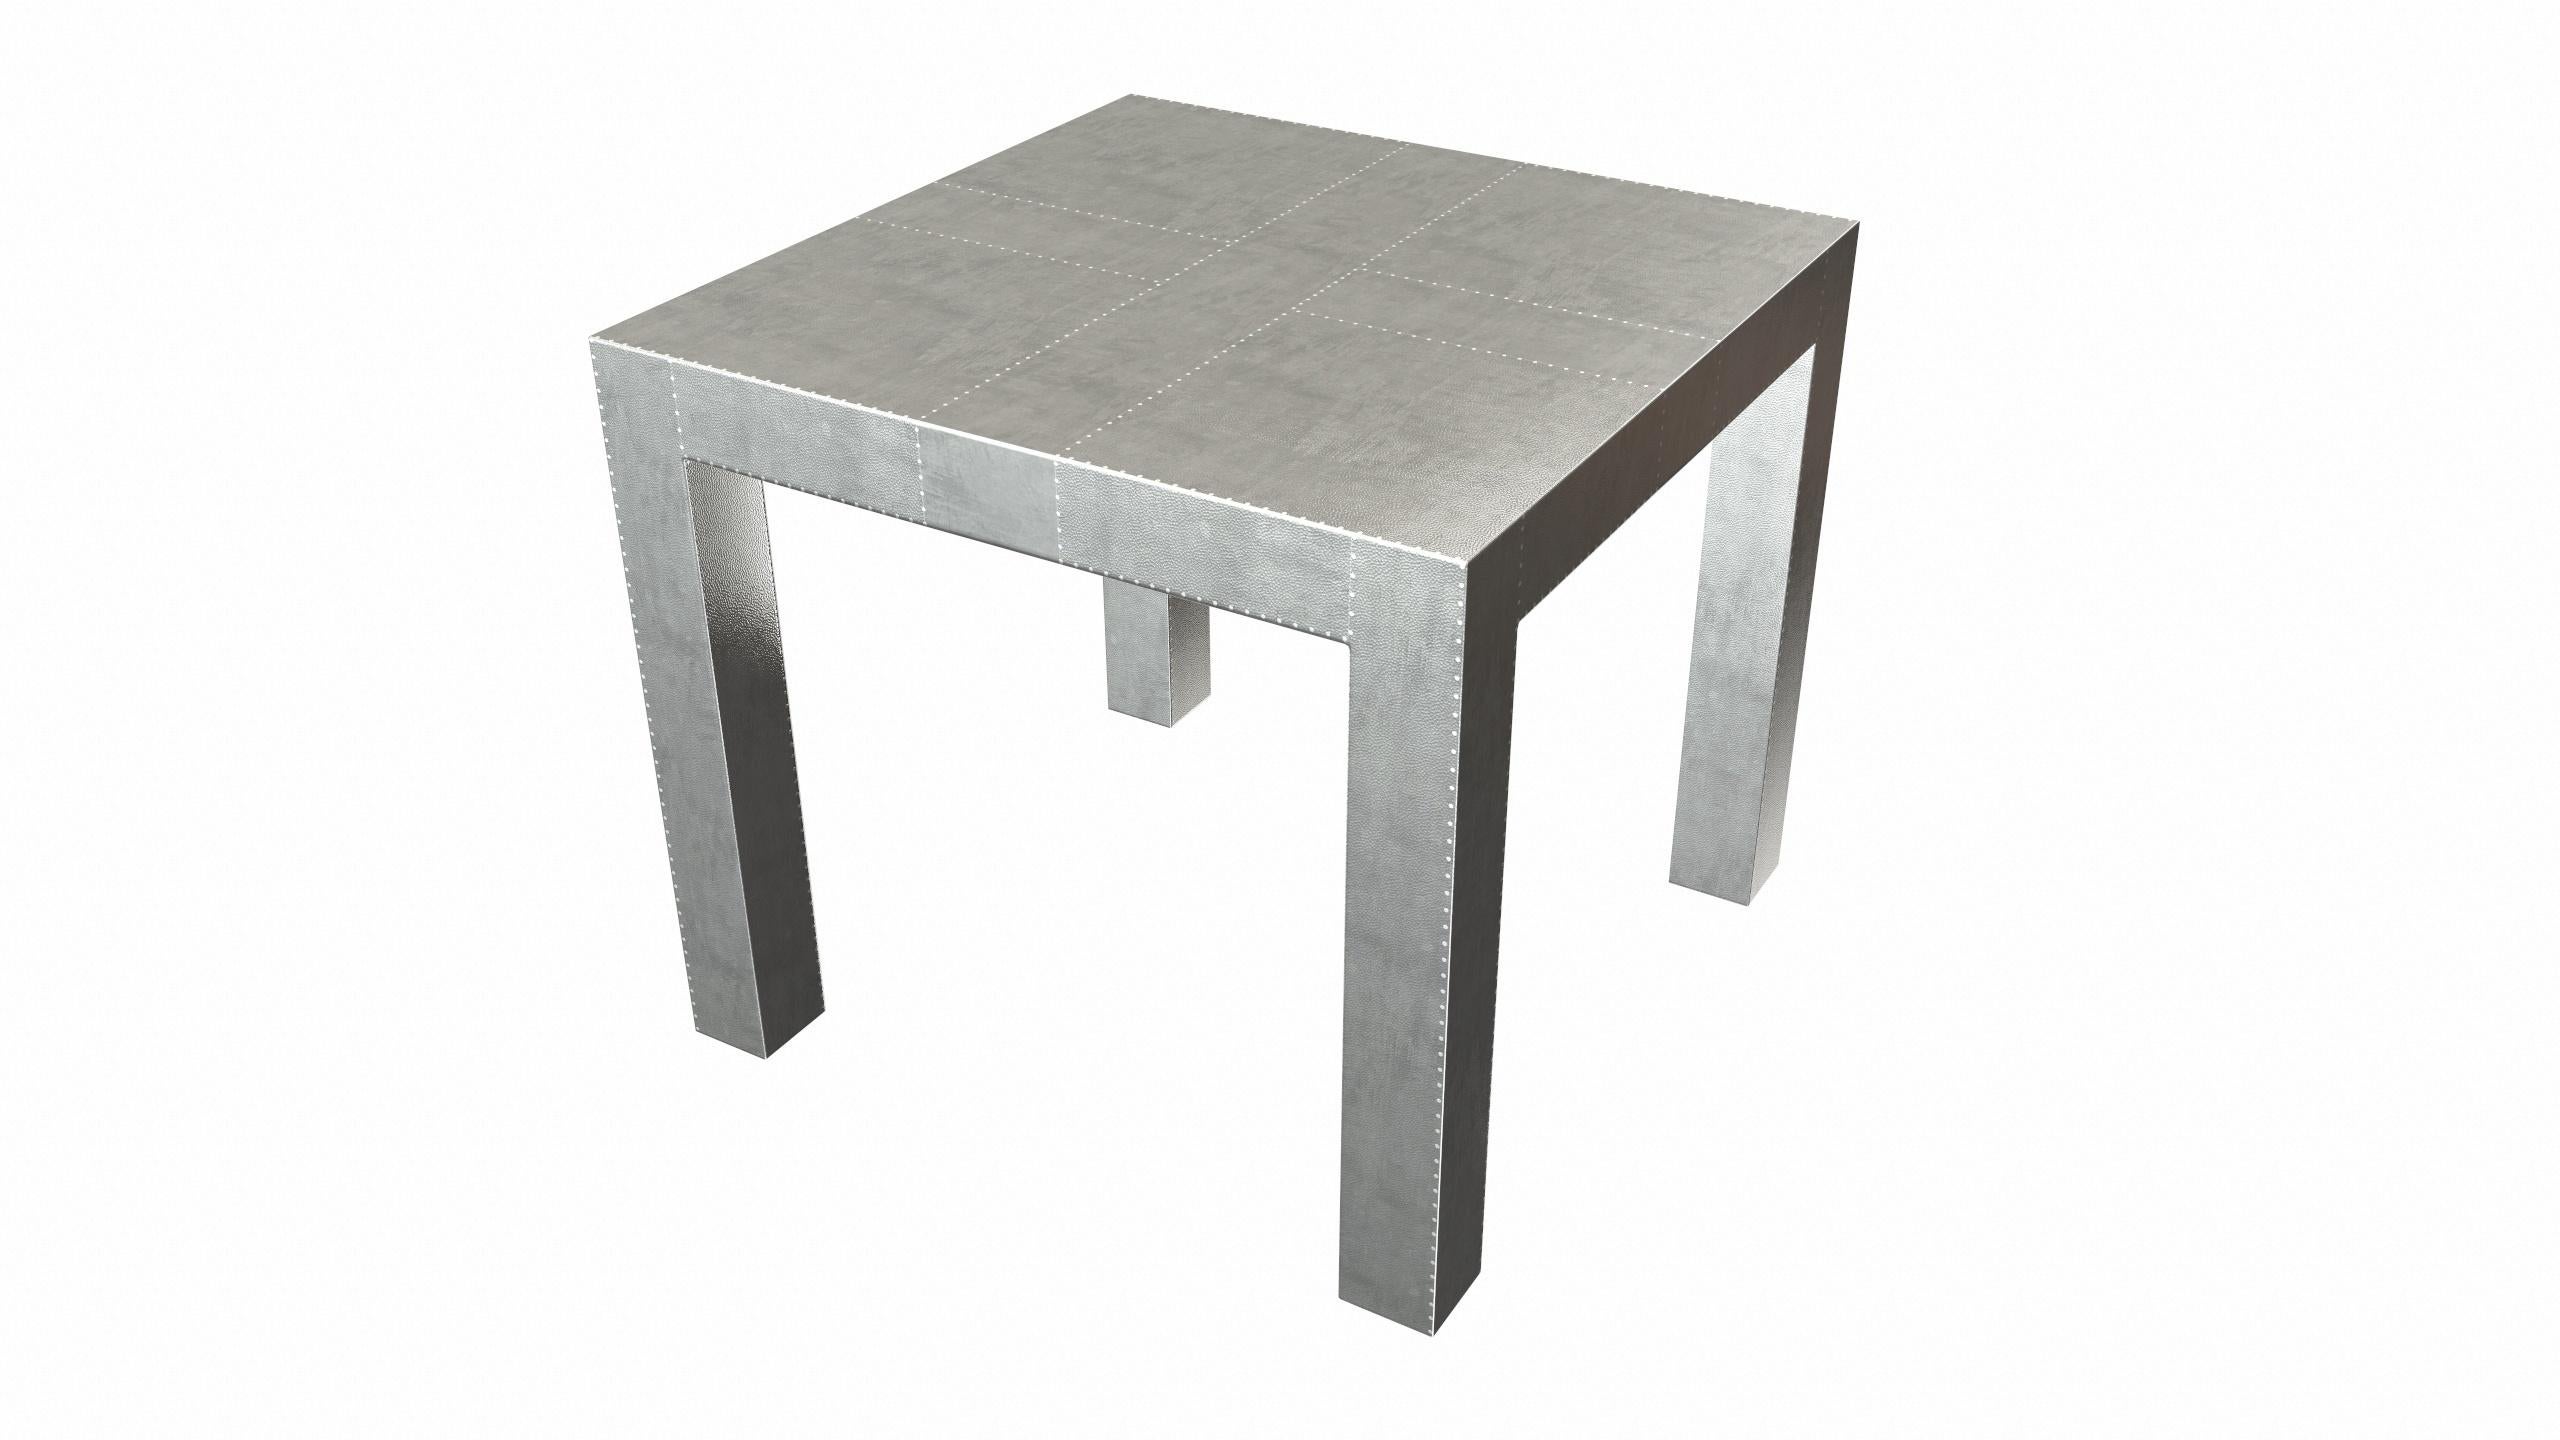 Contemporary Art Deco Square Drink Center Tables Mid. Hammered White Bronze by Alison Spear For Sale